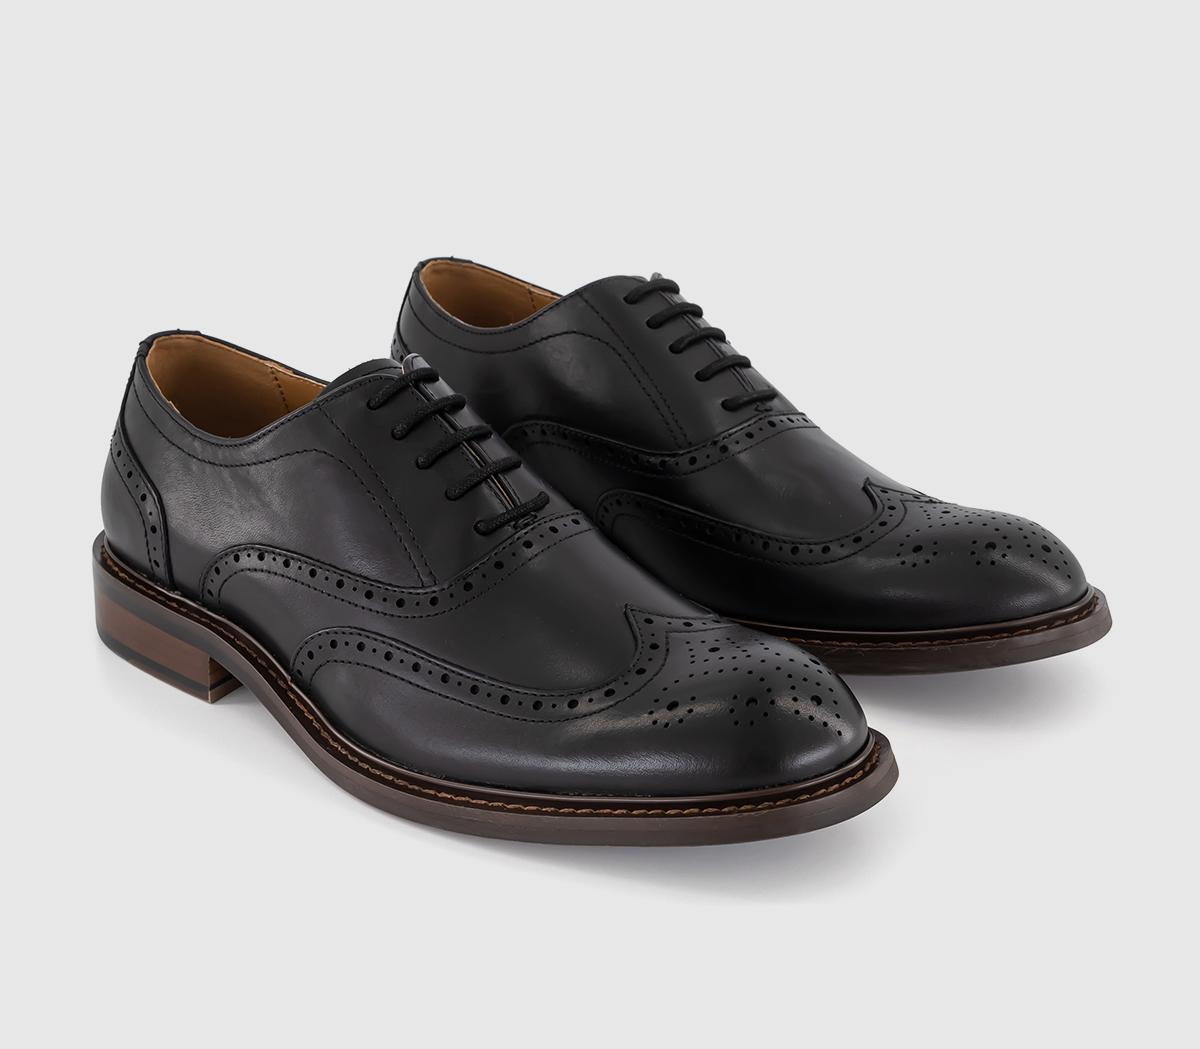 OFFICE Mens Maxwell Oxford Brogues Black Leather, 10